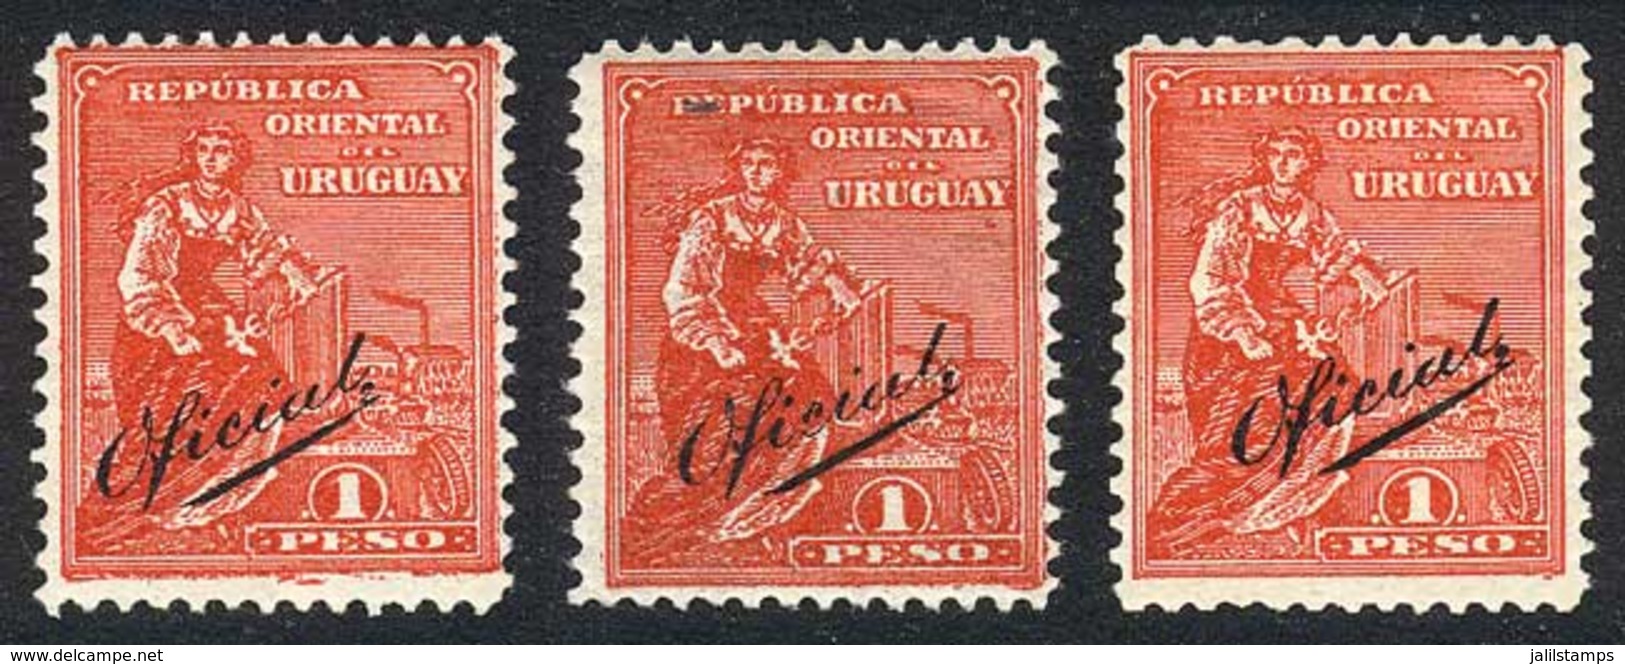 URUGUAY: Issue Of 1915, 1P. Red, 3 Mint Examples Of Excellent Quality! - Uruguay